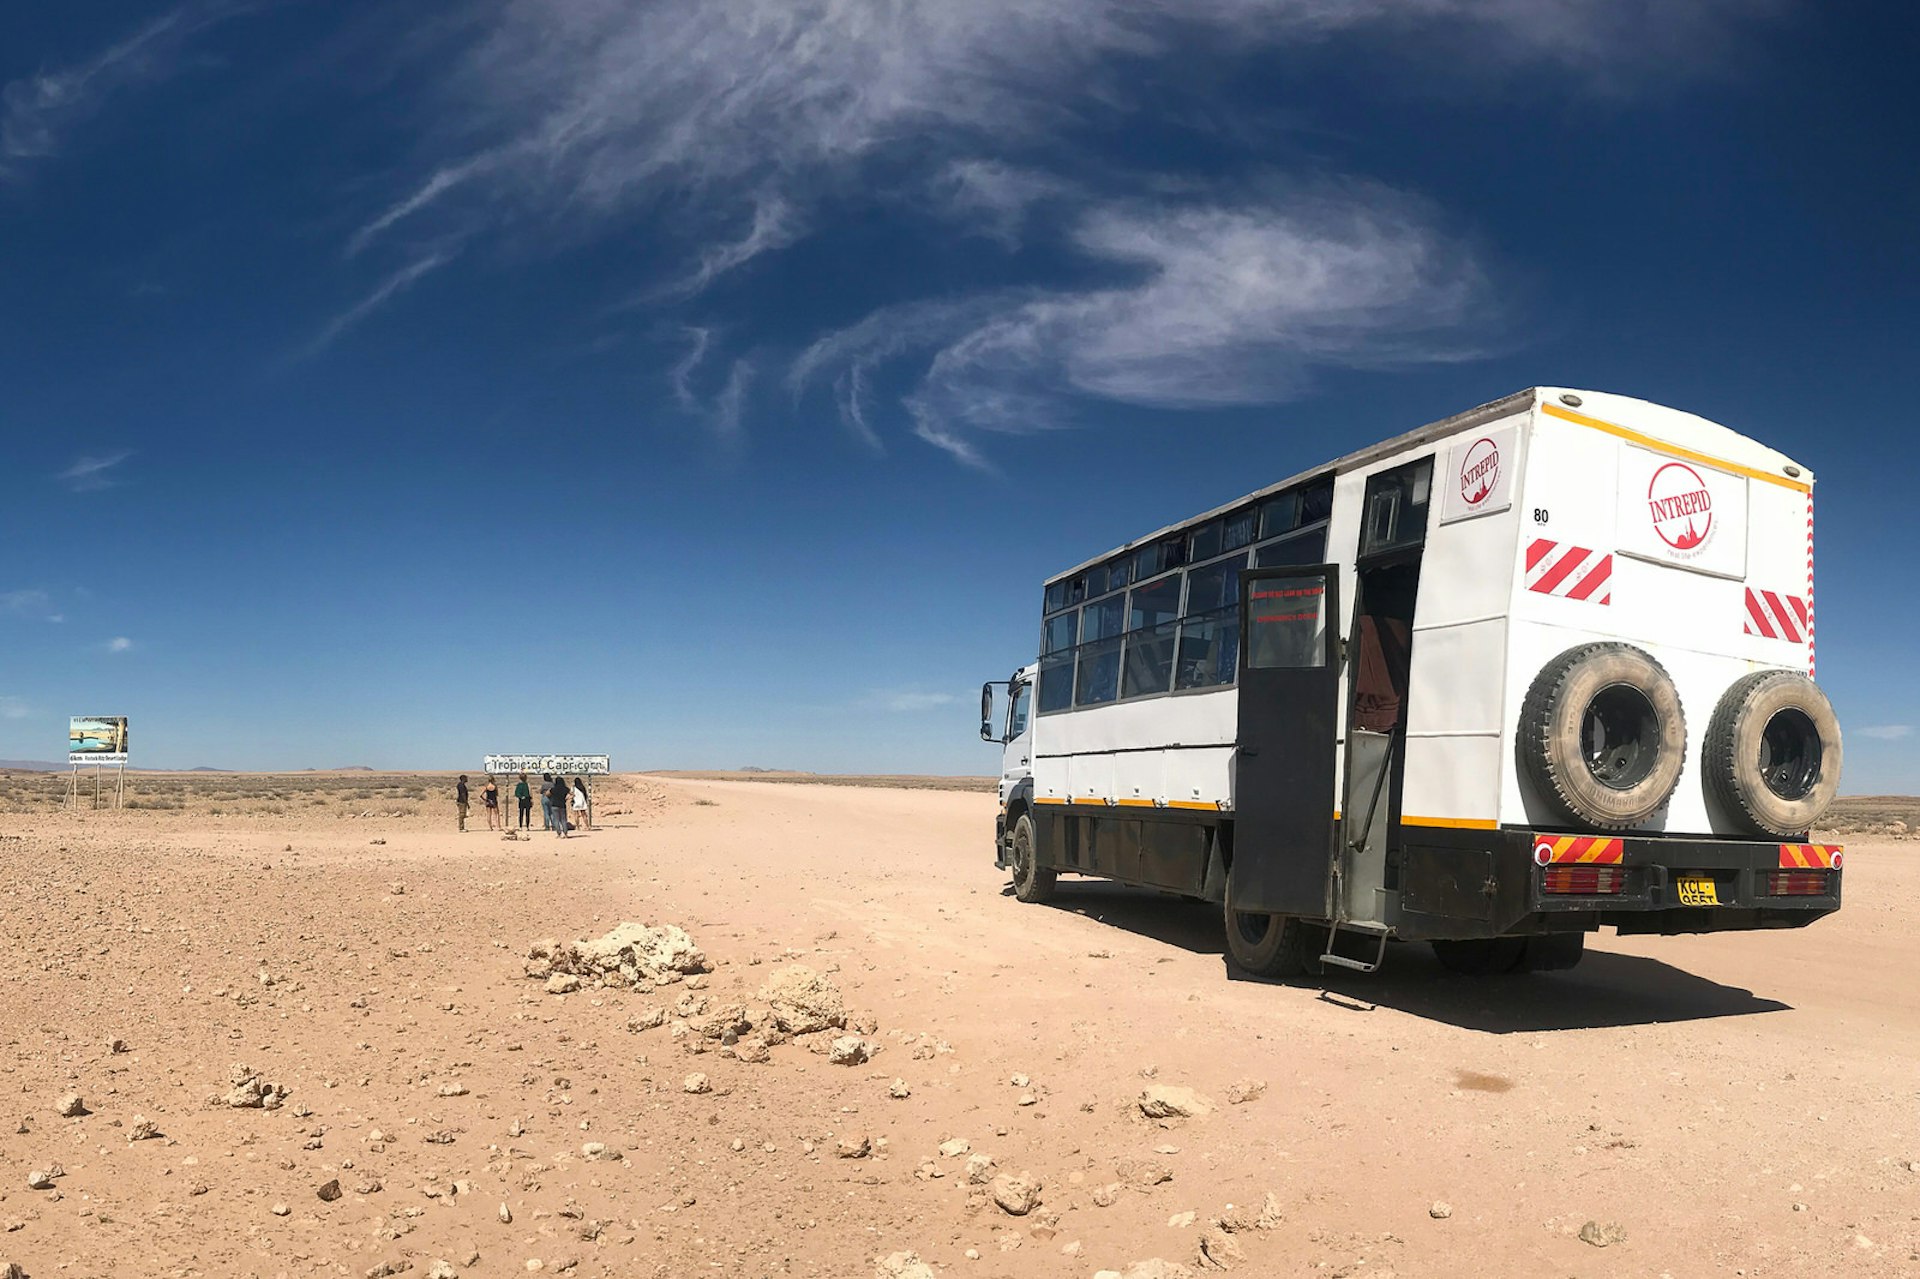 The large overland truck sits in the foreground with its door open, with half a dozen people standing in the distance next to the Tropic of Capricorn roadsign; the setting is a dusty, rocky desert with a deep blue sky and whispy clouds @ Sarah Reid / Lonely Planet